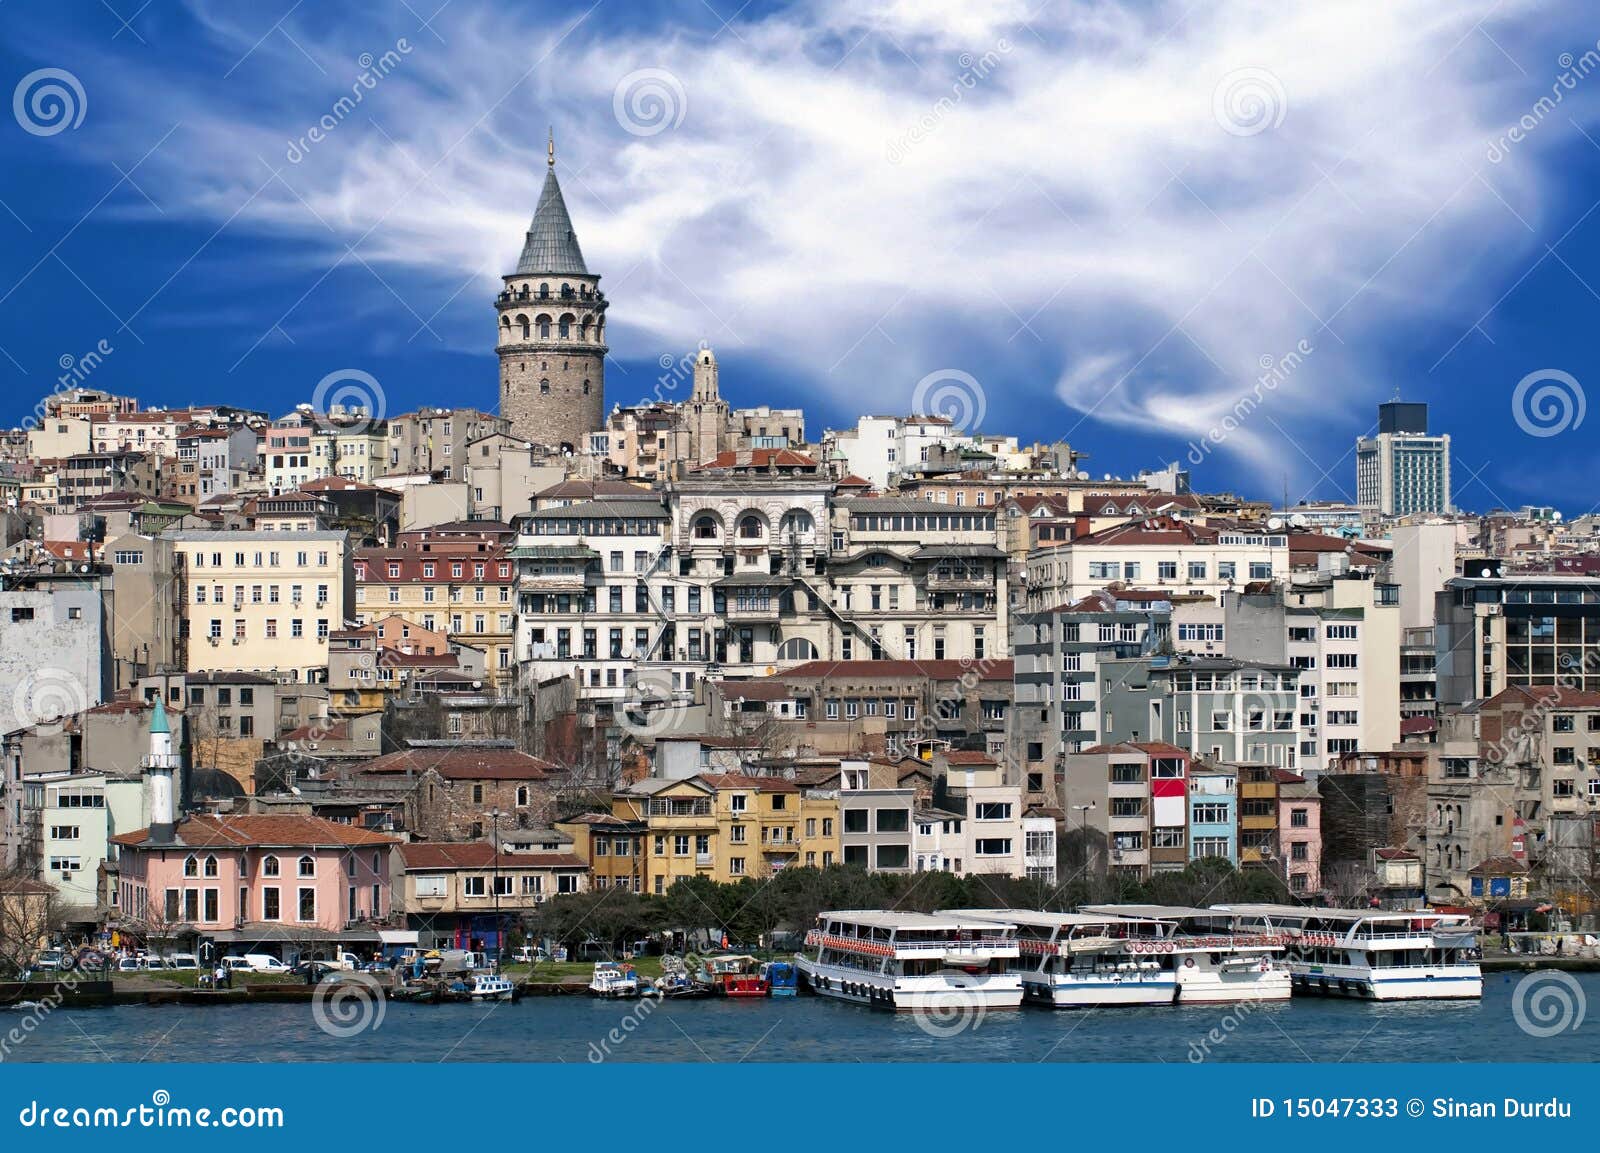 image of istanbul